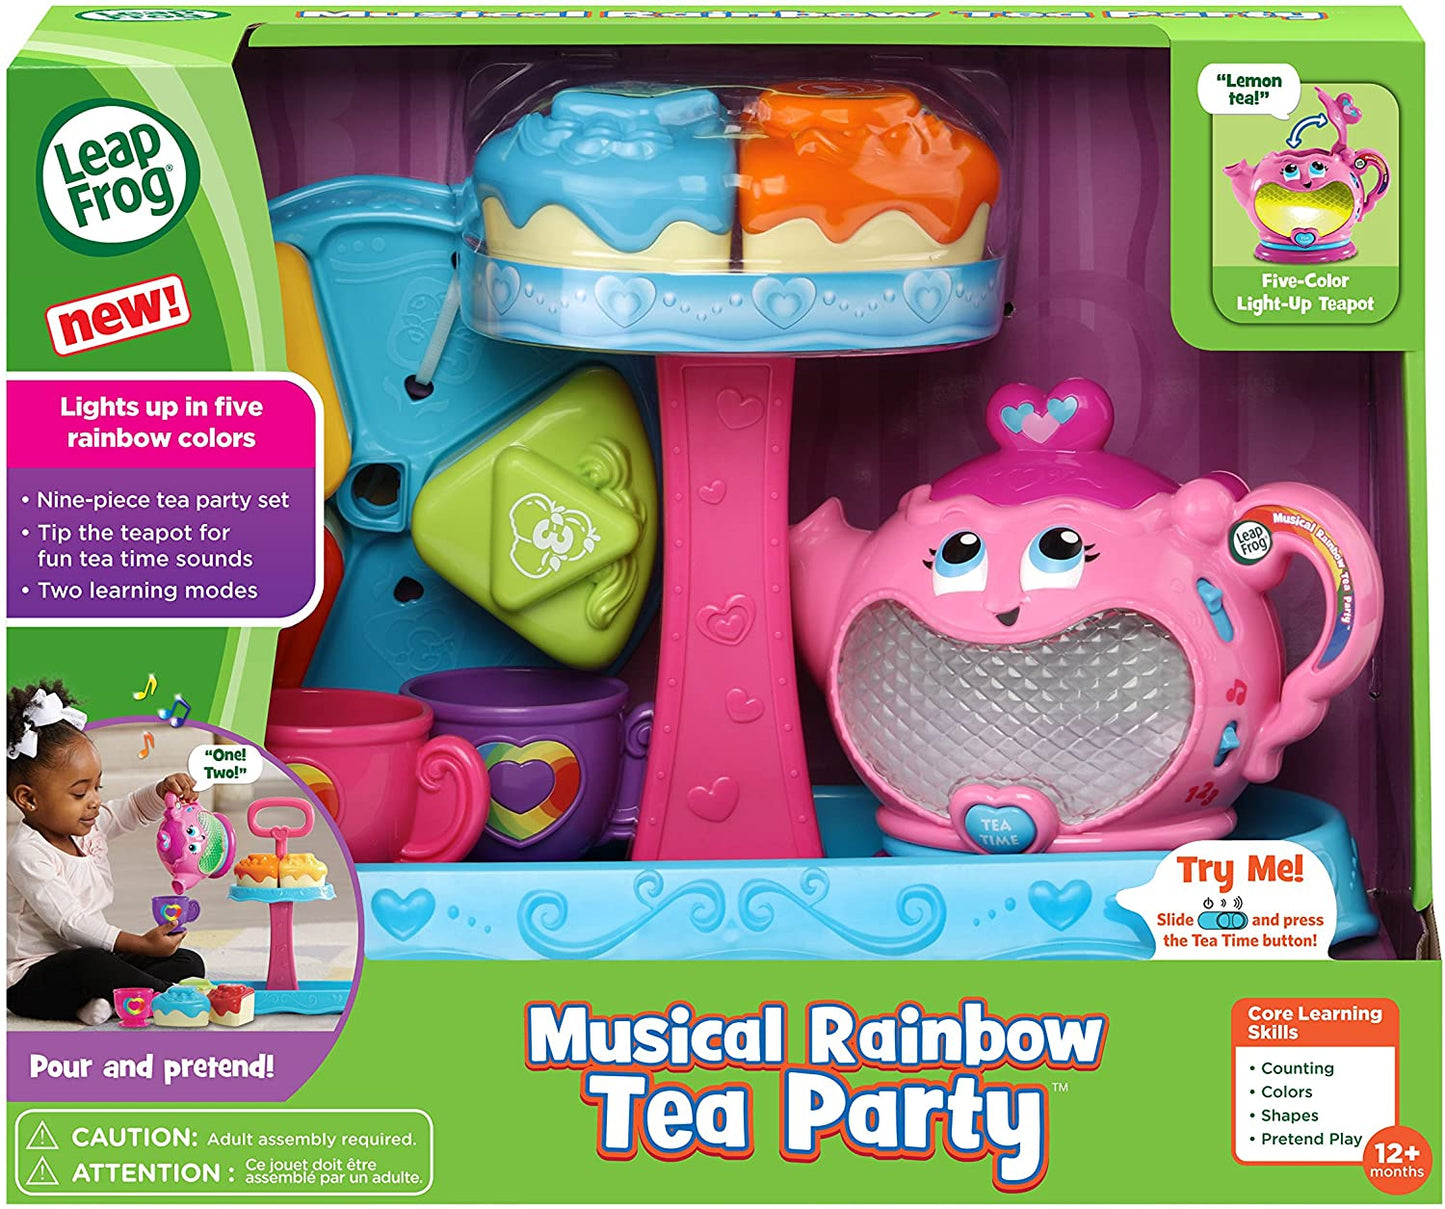 Leap Frog Learn & Groove Rainbow Lights Piano